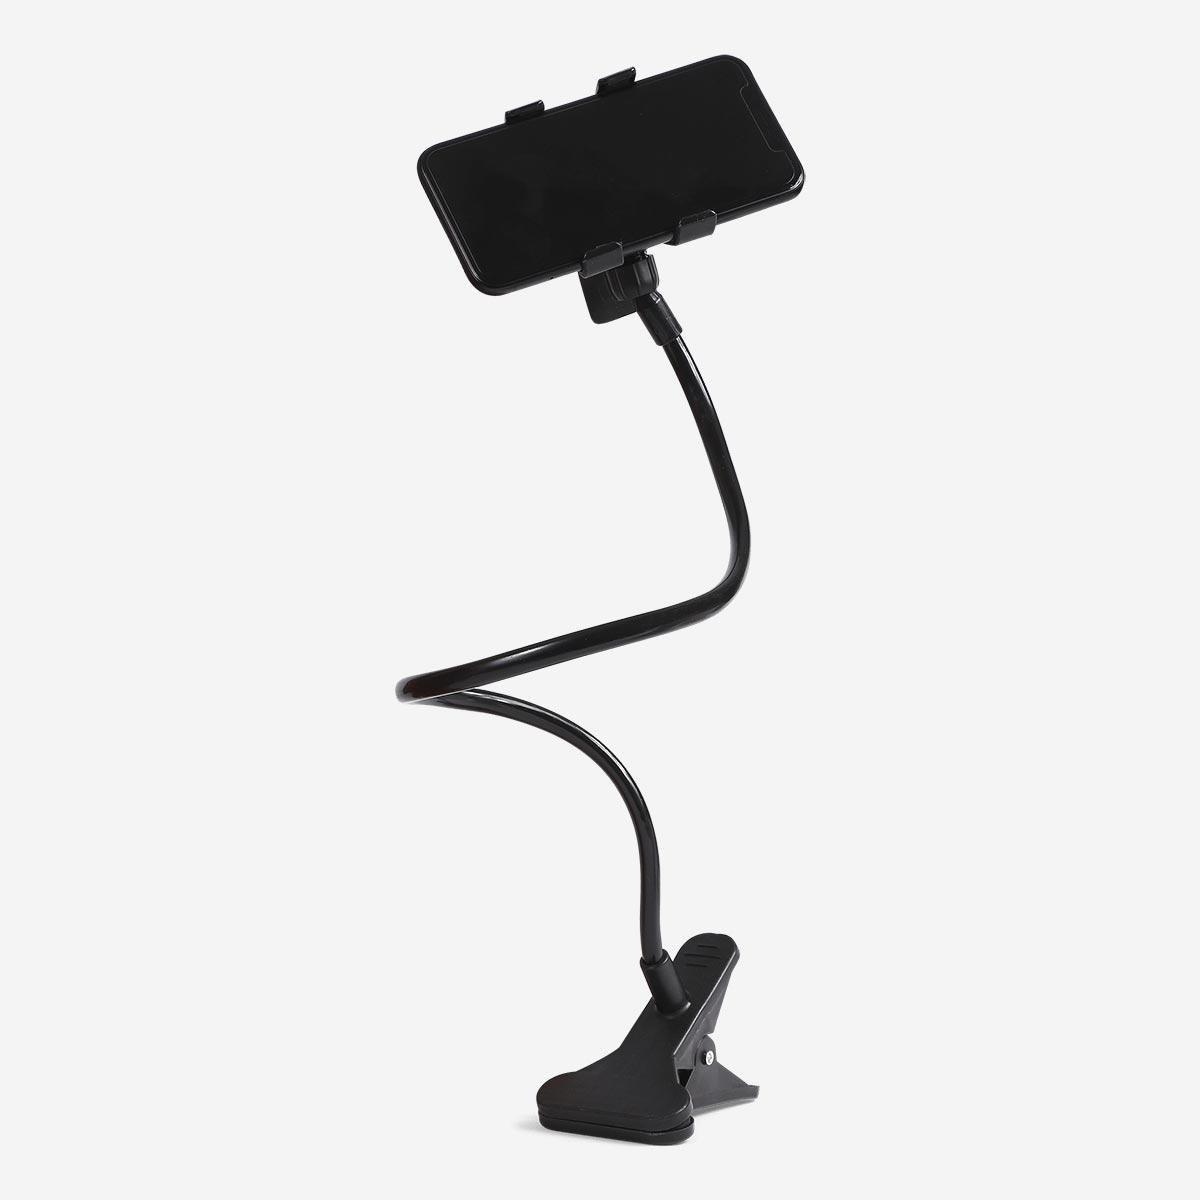 Black smartphone holder with clamp